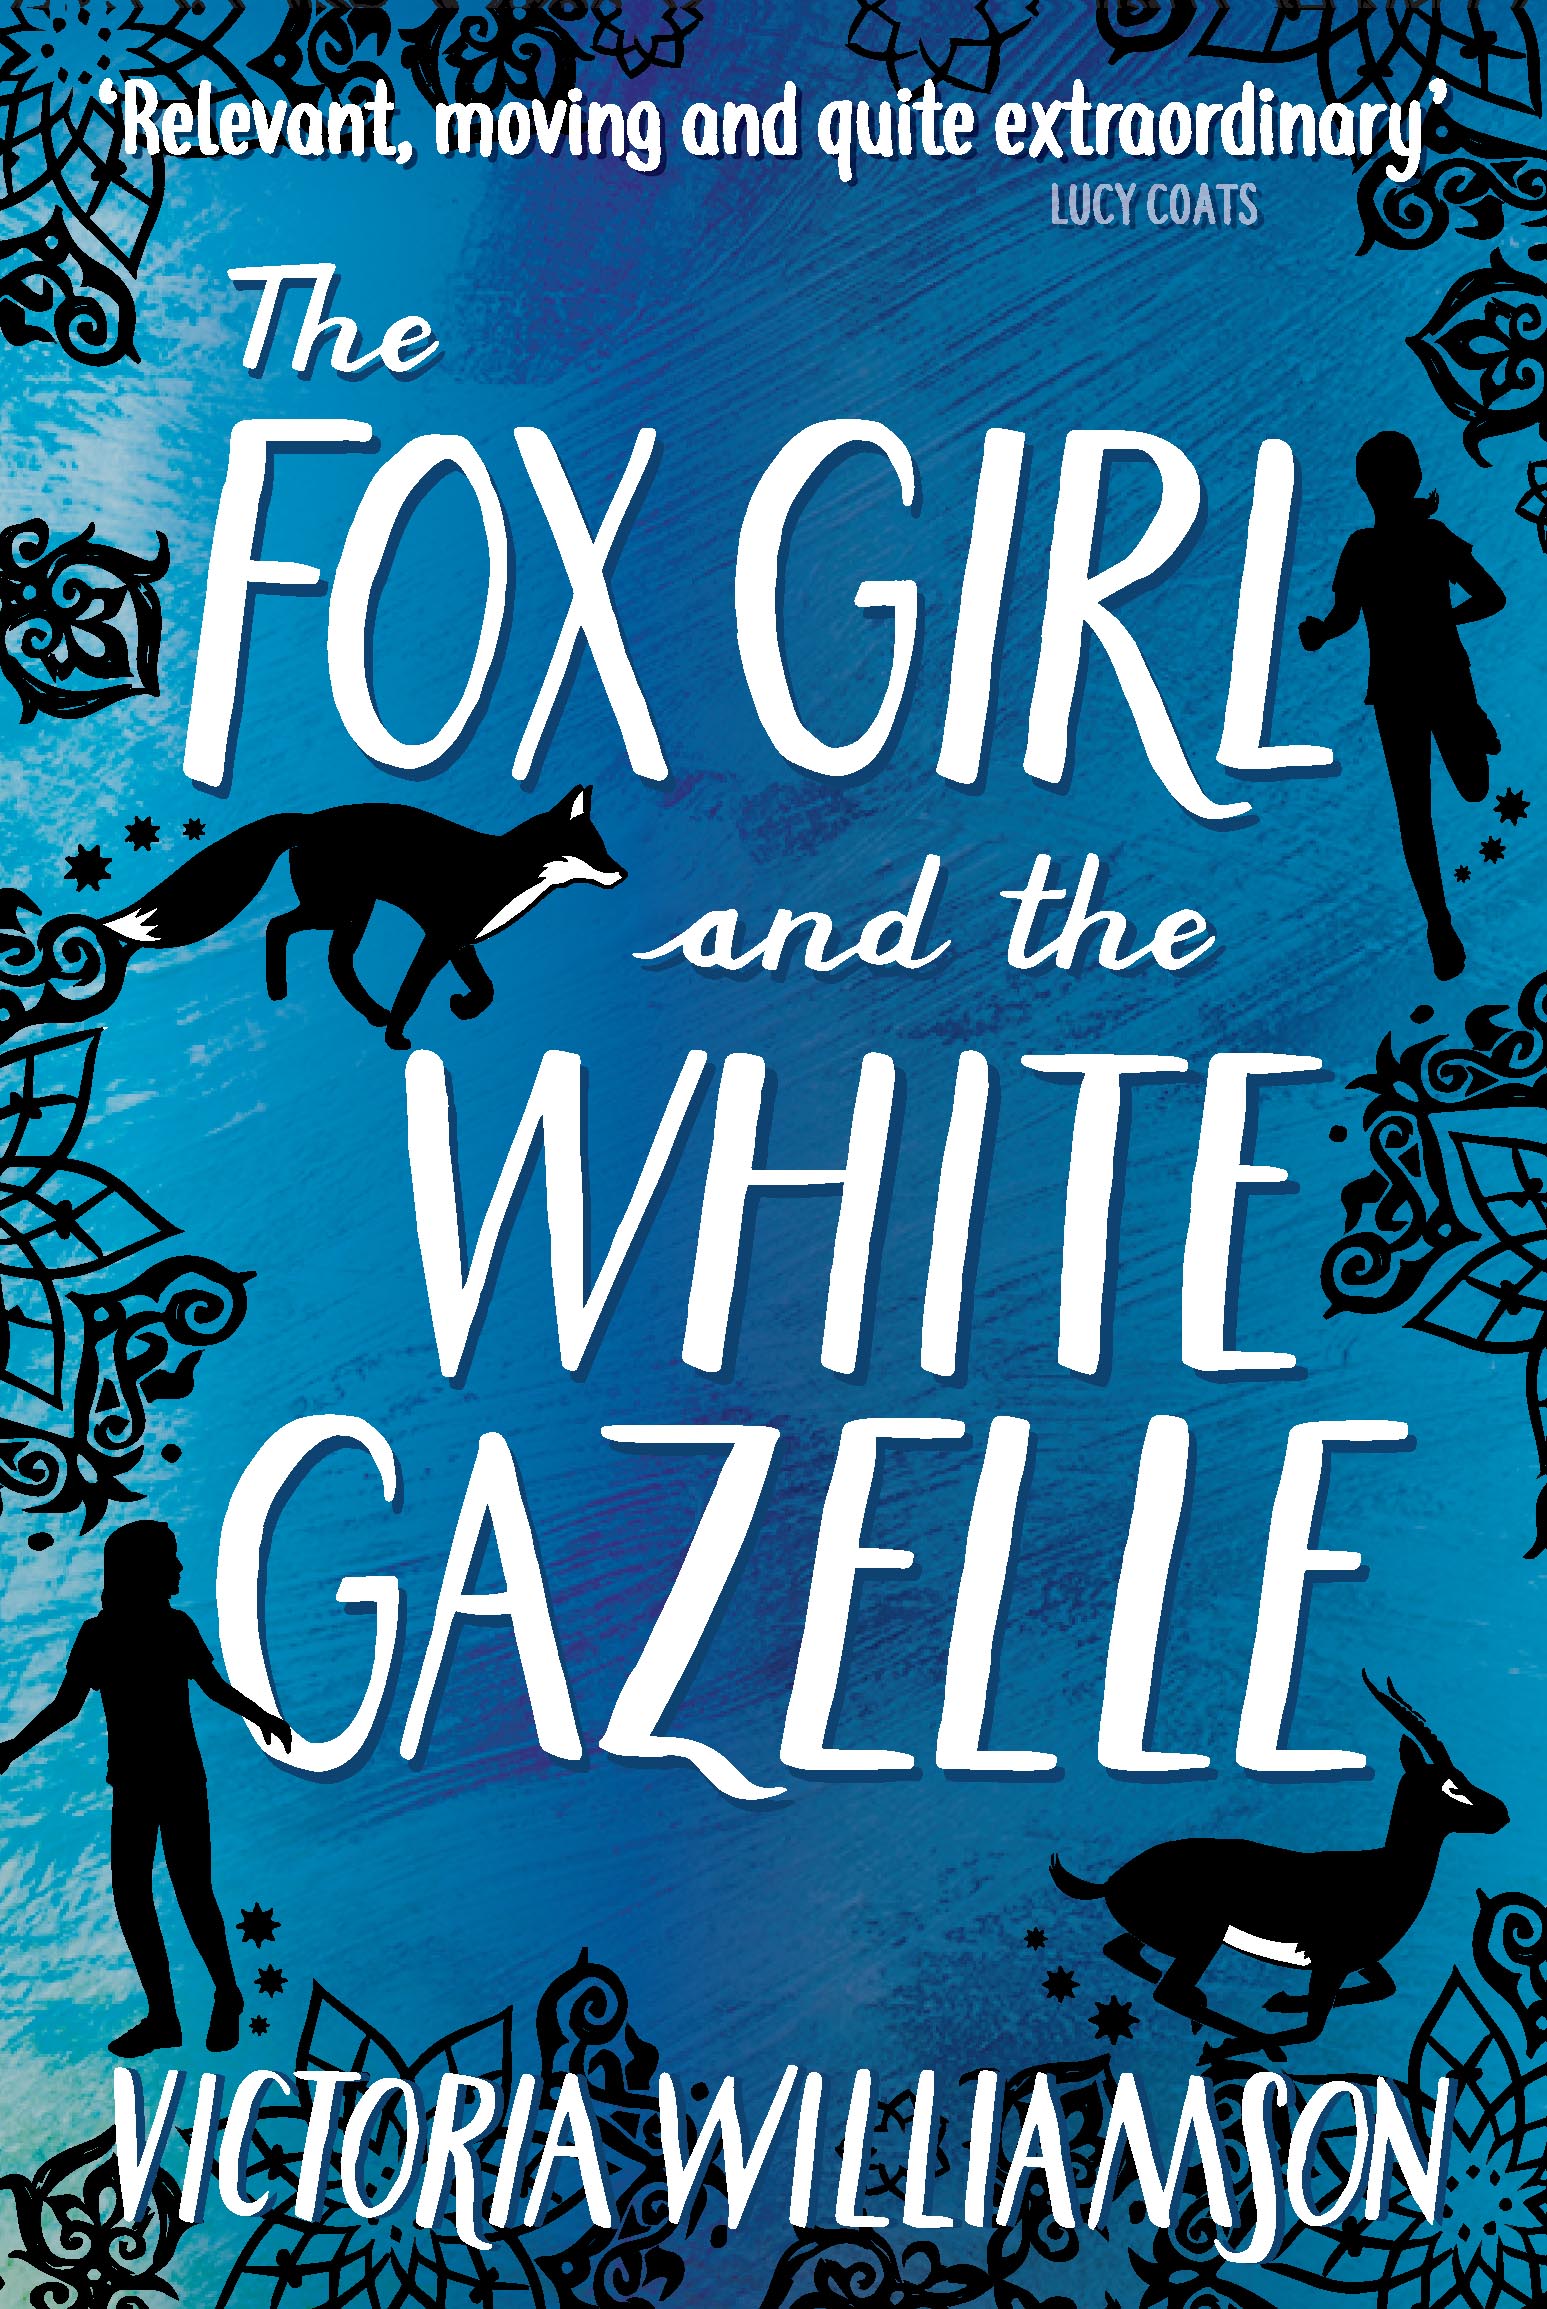 Victoria Williamson – The Fox Girl and the White Gazelle (8–12 years)